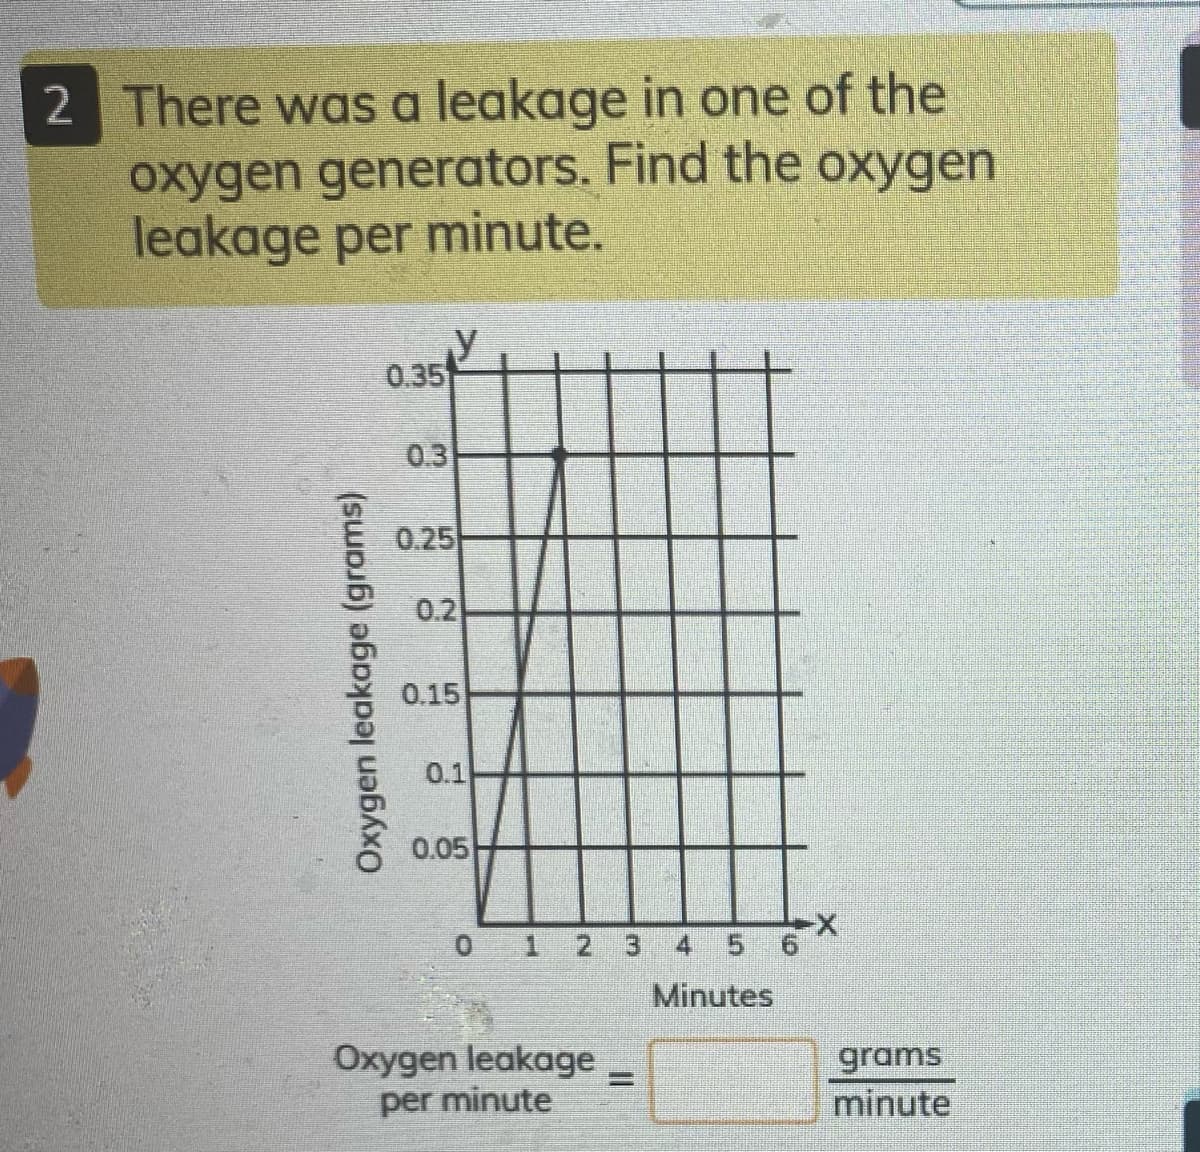 2 There was a leakage in one of the
oxygen generators. Find the oxygen
leakage per minute.
0.35
0.3
0.25
0.2
0.15
0.1
0.05
0 1 2
3.
Minutes
Oxygen leakage
per minute
grams
minute
Oxygen leakage (grams)
